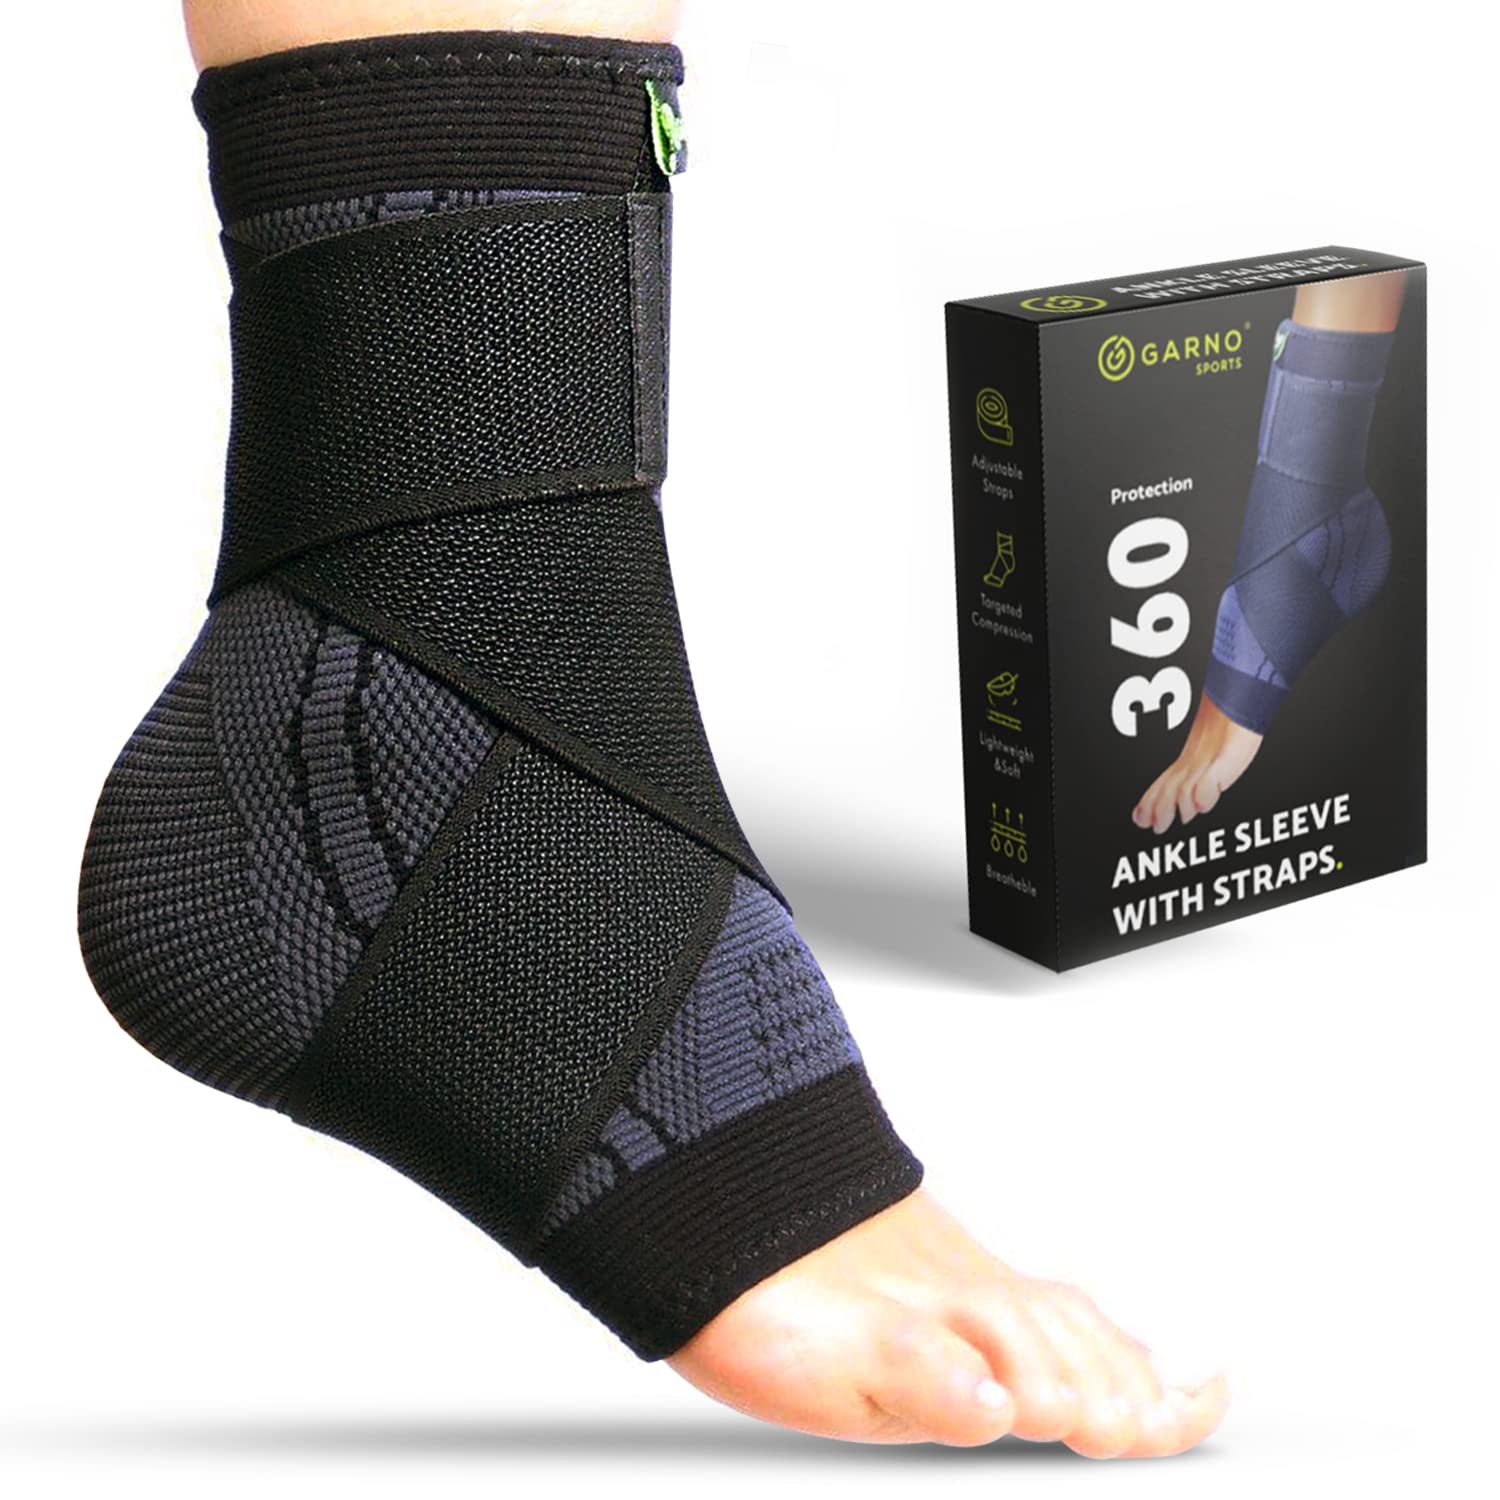 Arch Support Neoprene Orthotics, Braces & Orthopedic Sleeves for sale